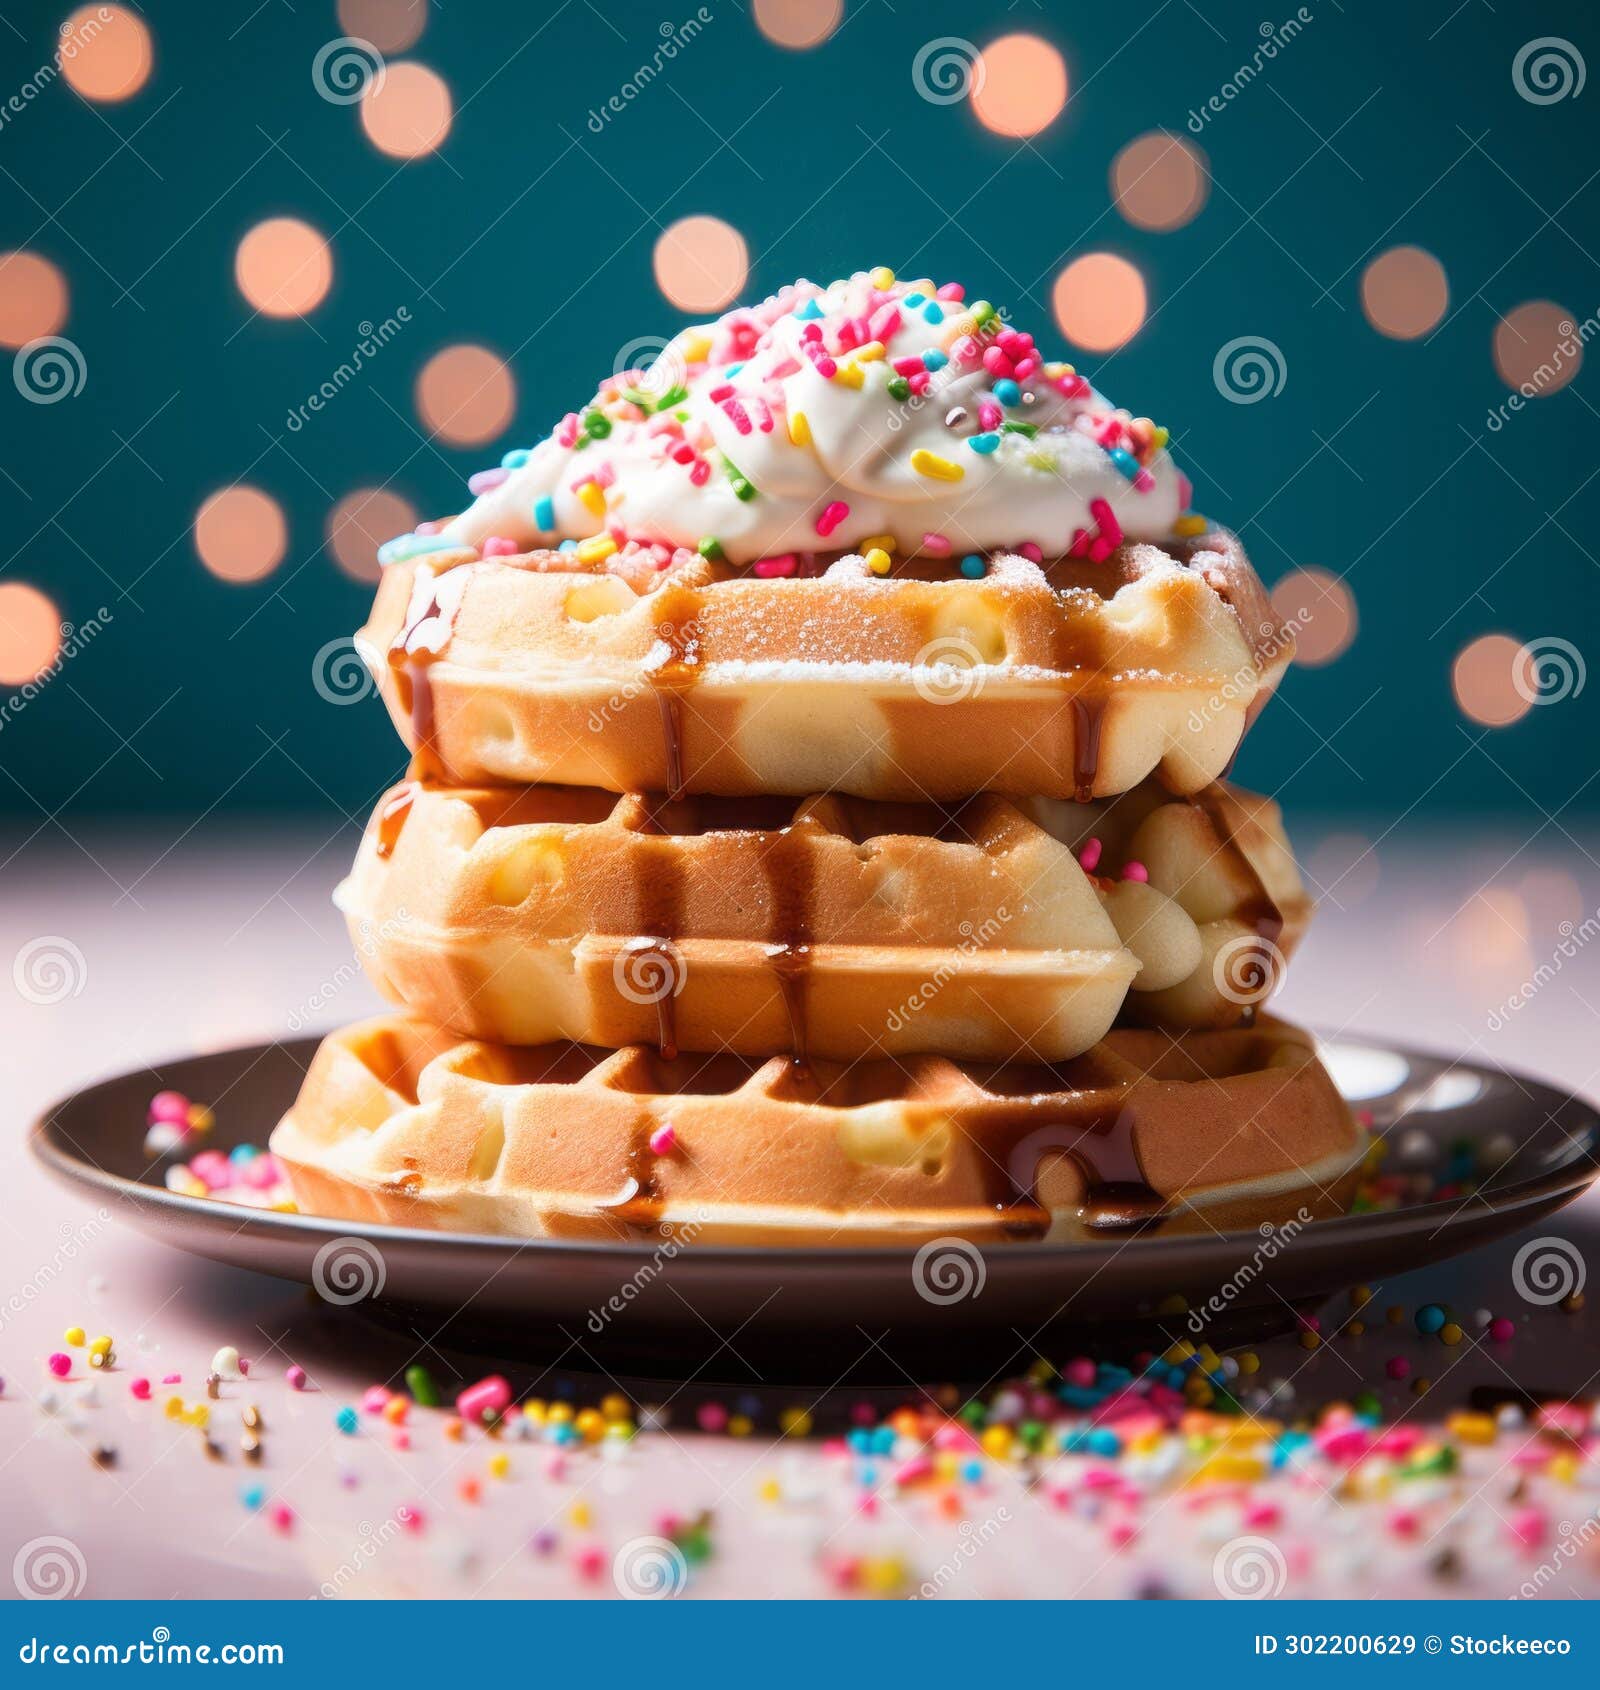 pop culture waffles with whipped cream and sprinkles